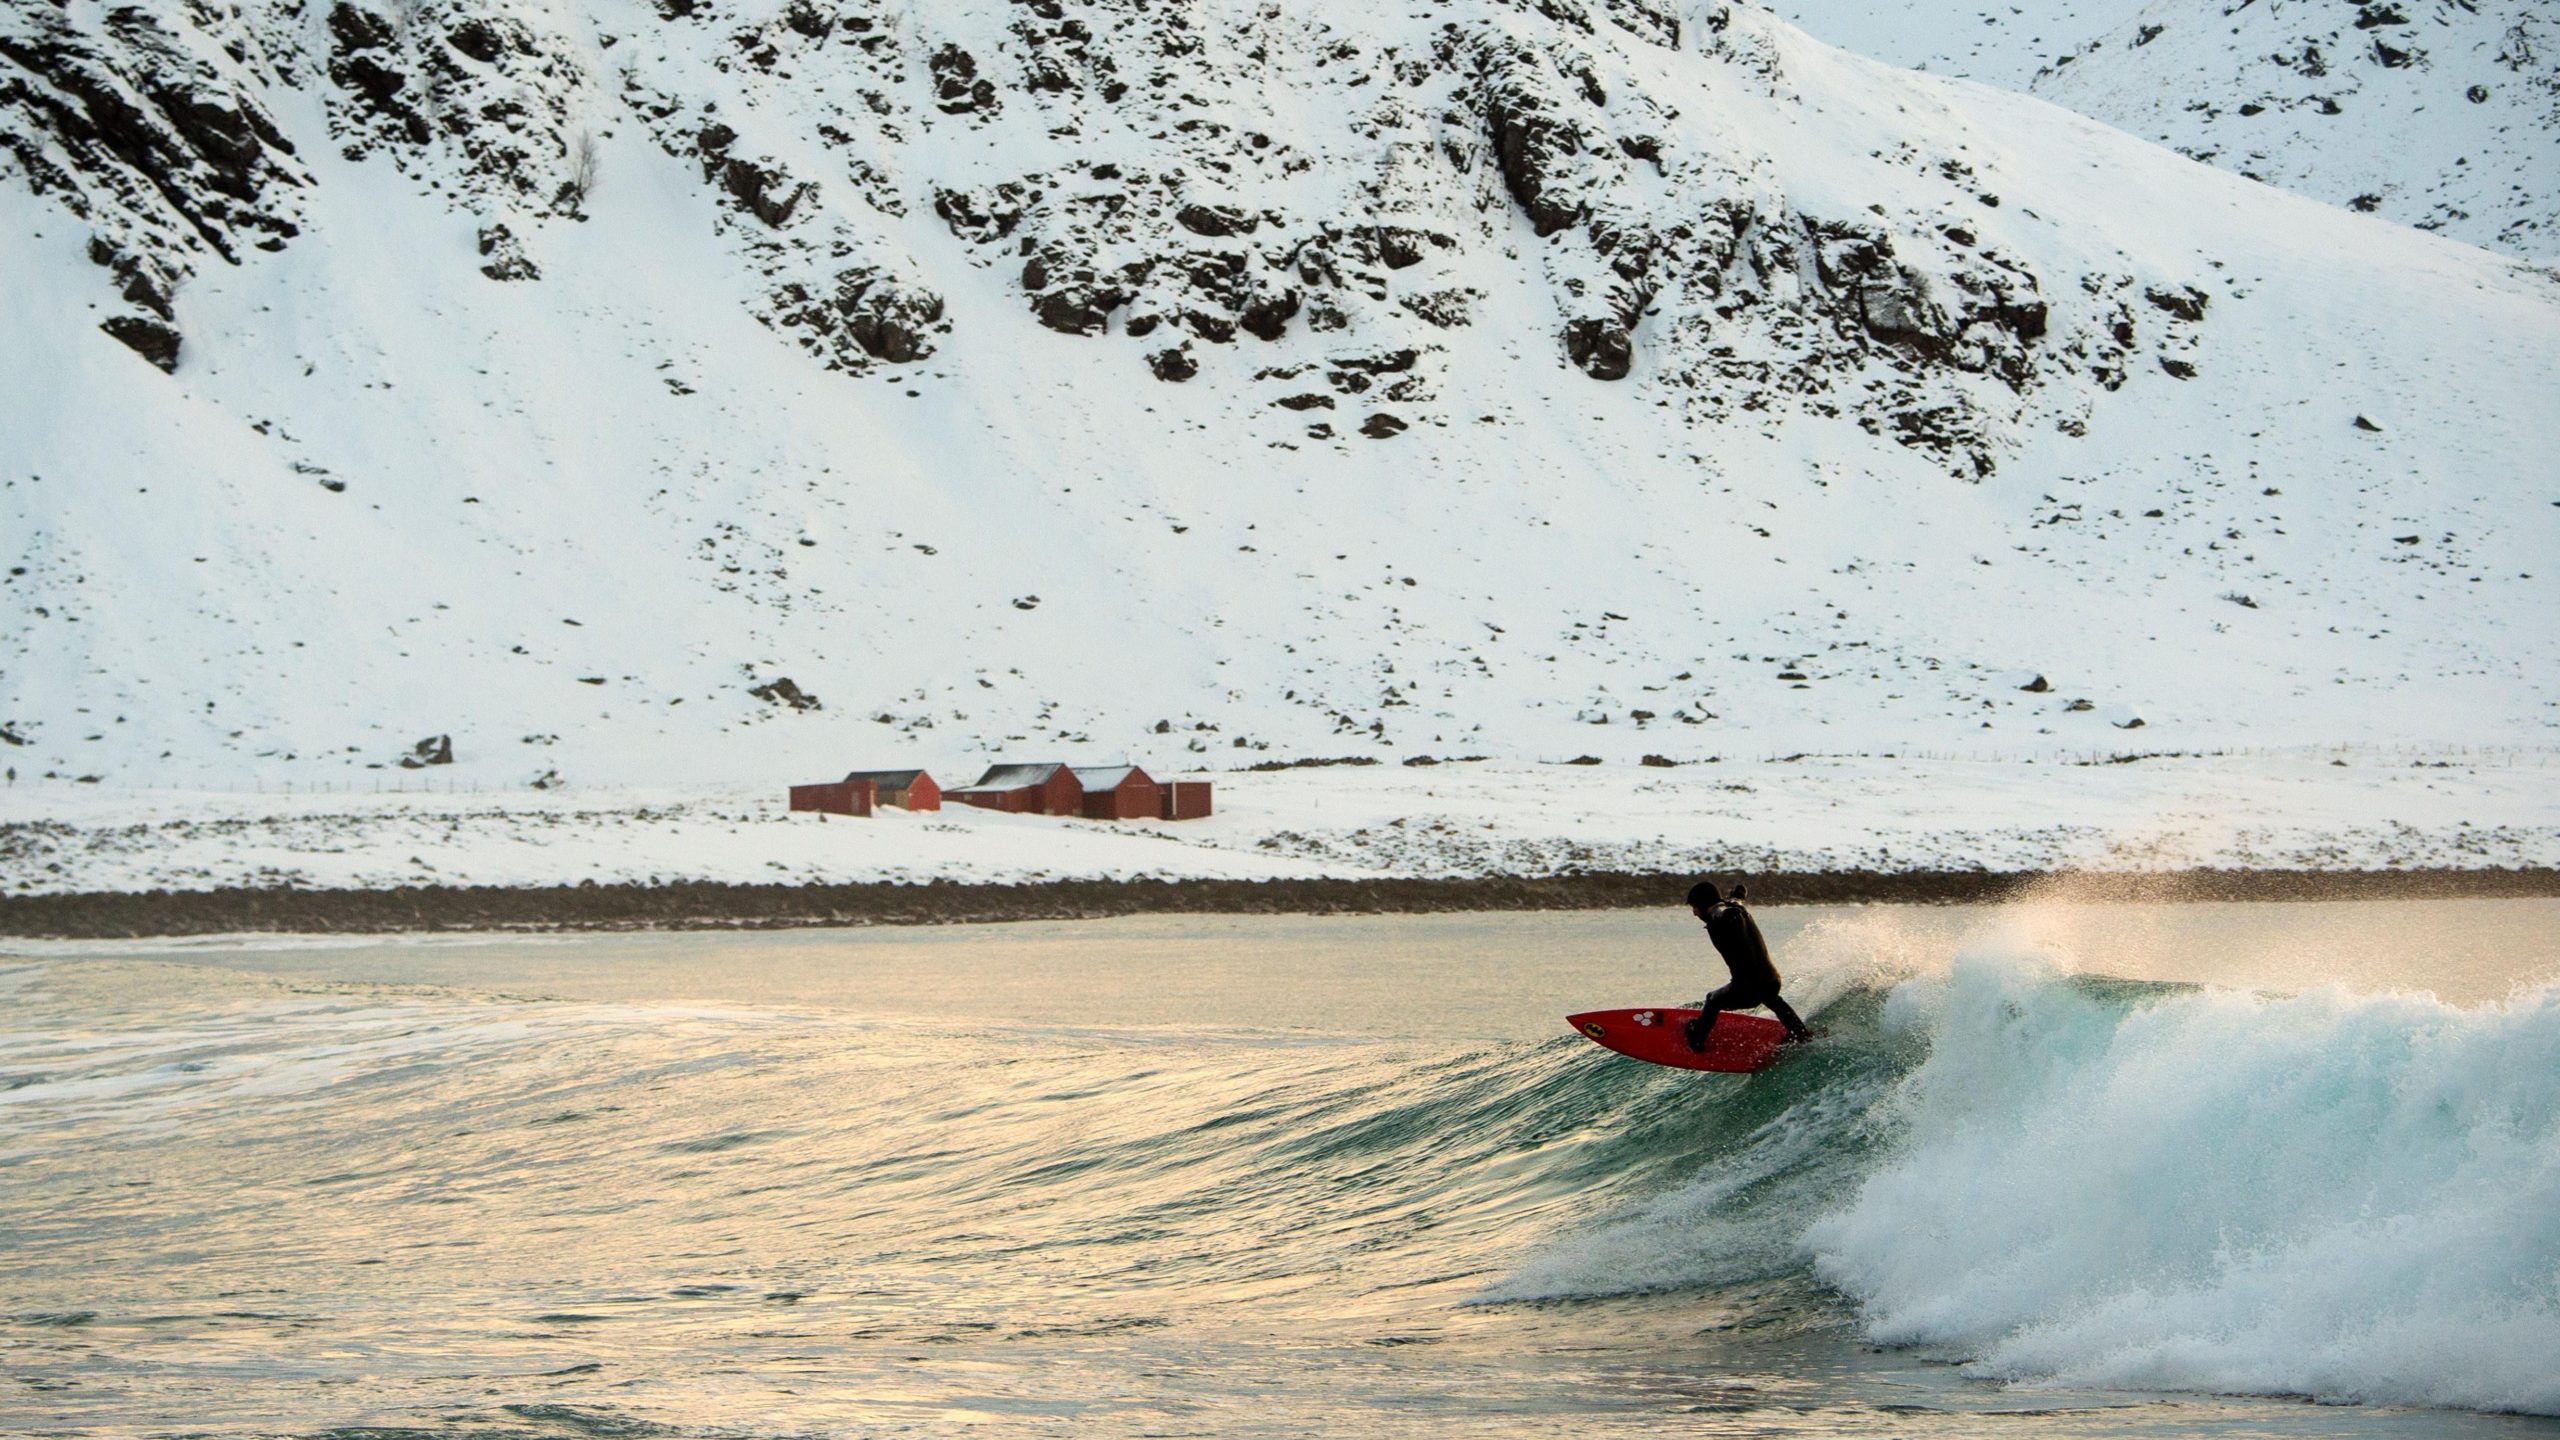 A surfer rides a wave at the snowy beach of Unstad, in Lofoten Island, Arctic Circle. (Photo: Olivier Morin/AFP, Getty Images)